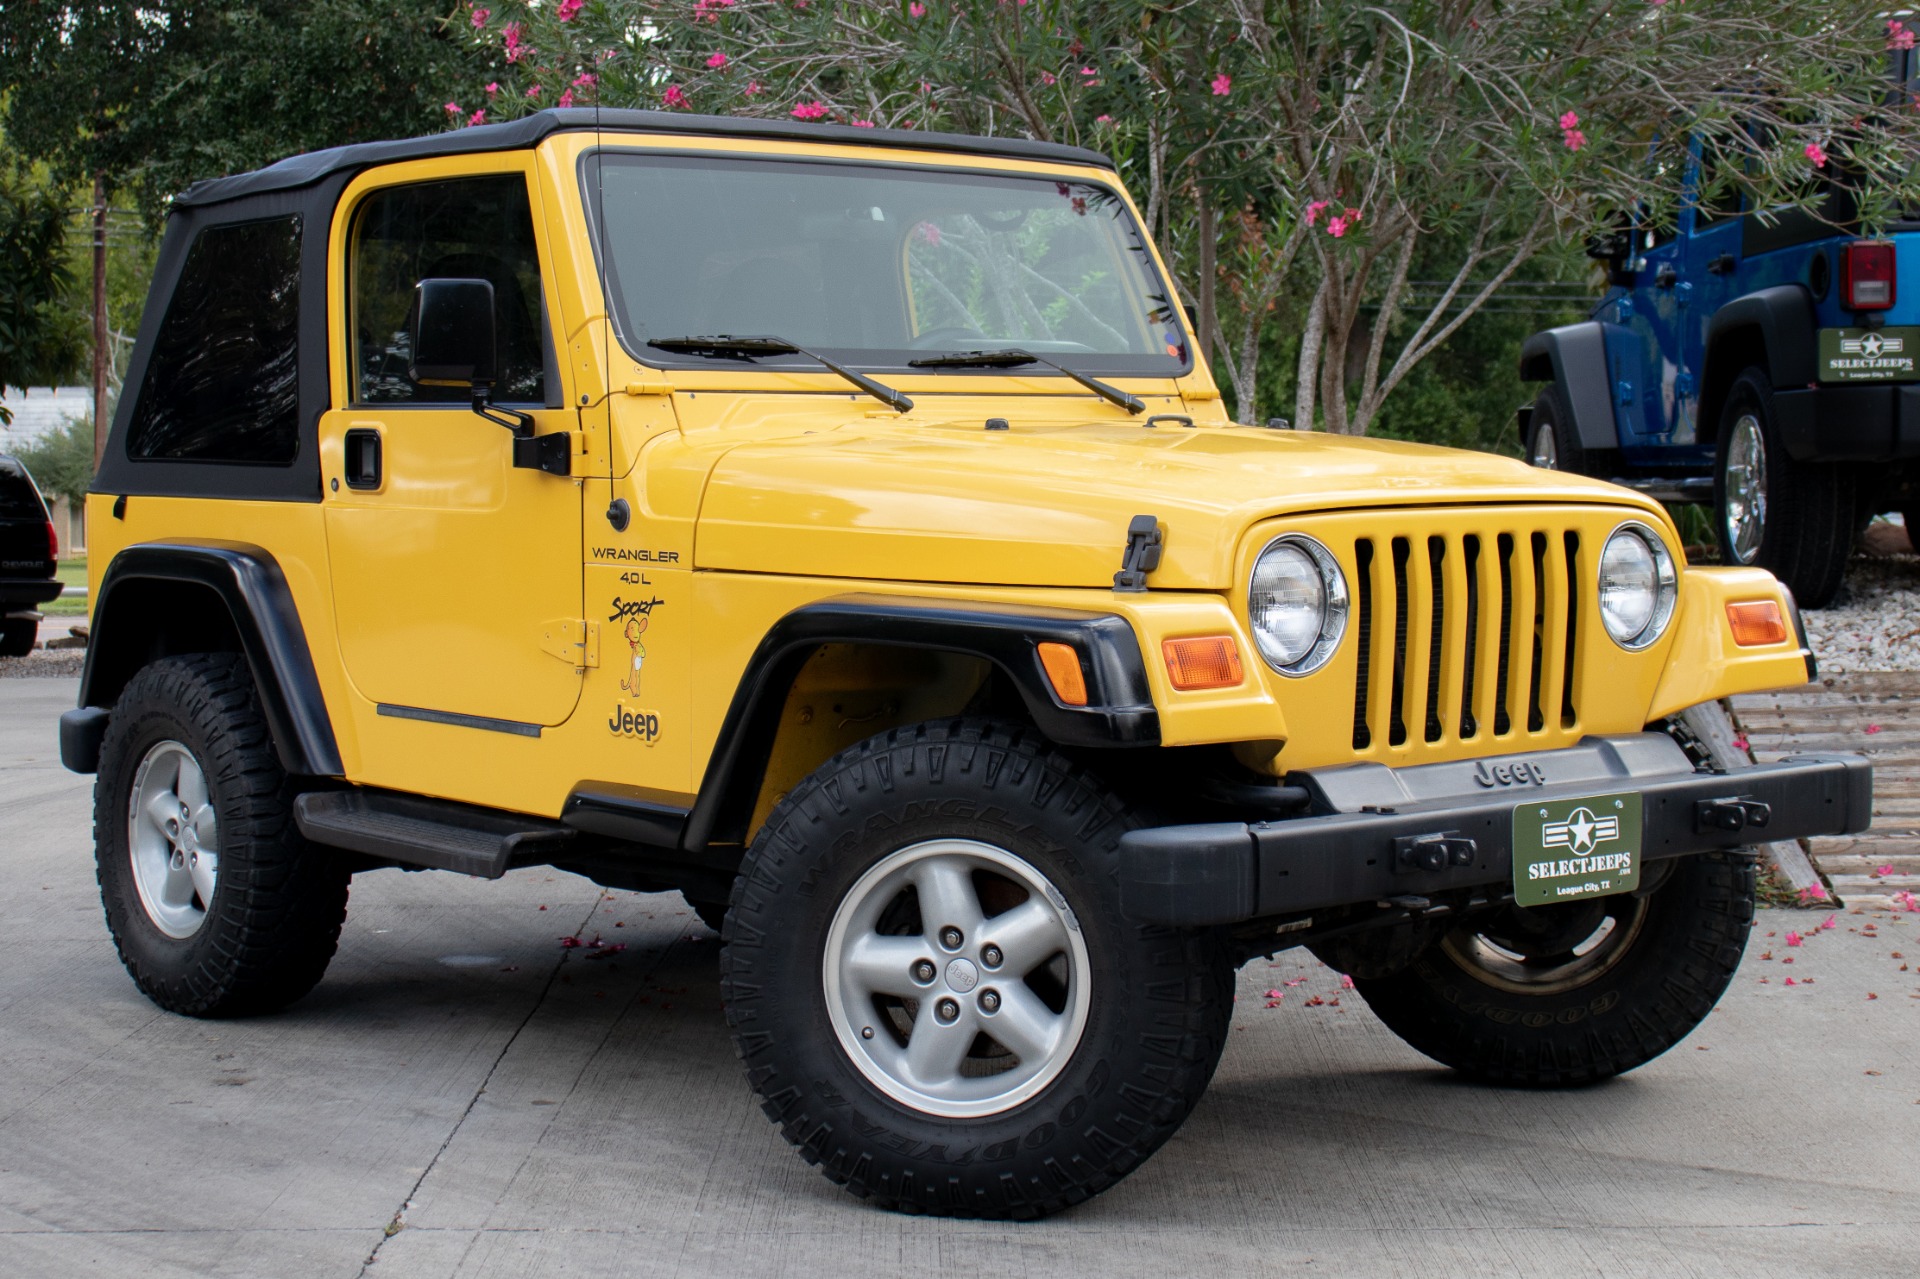 Used 2000 Jeep Wrangler 2dr Sport For Sale ($13,995) | Select Jeeps Inc.  Stock #724571